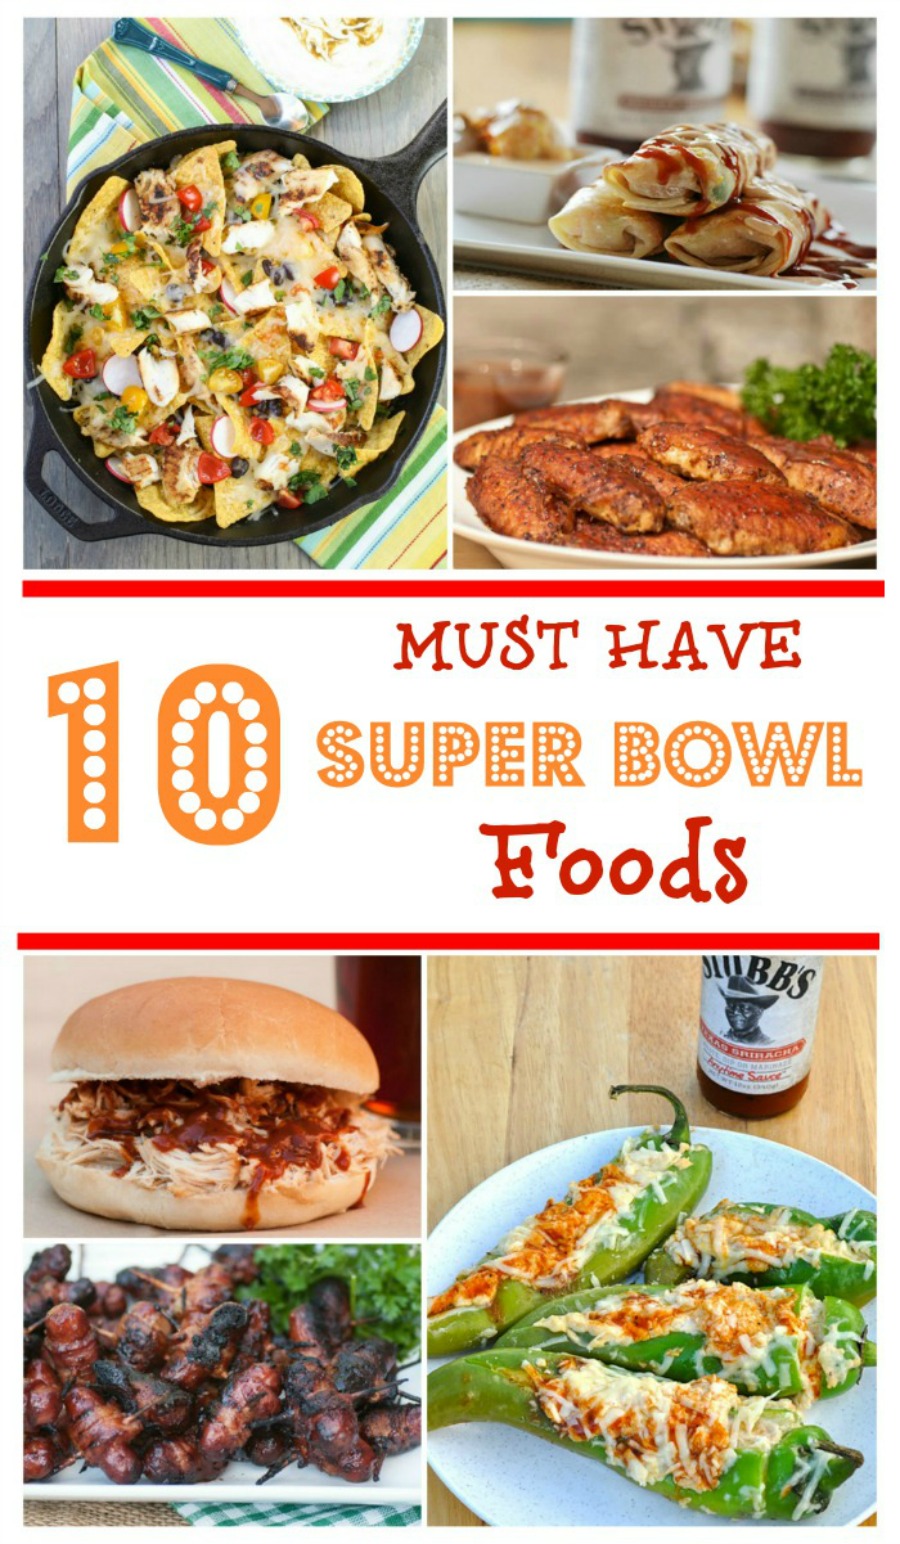 Looking for some delicious food for the big game? Check out these 10 Must Have Super Bowl Party Foods here!